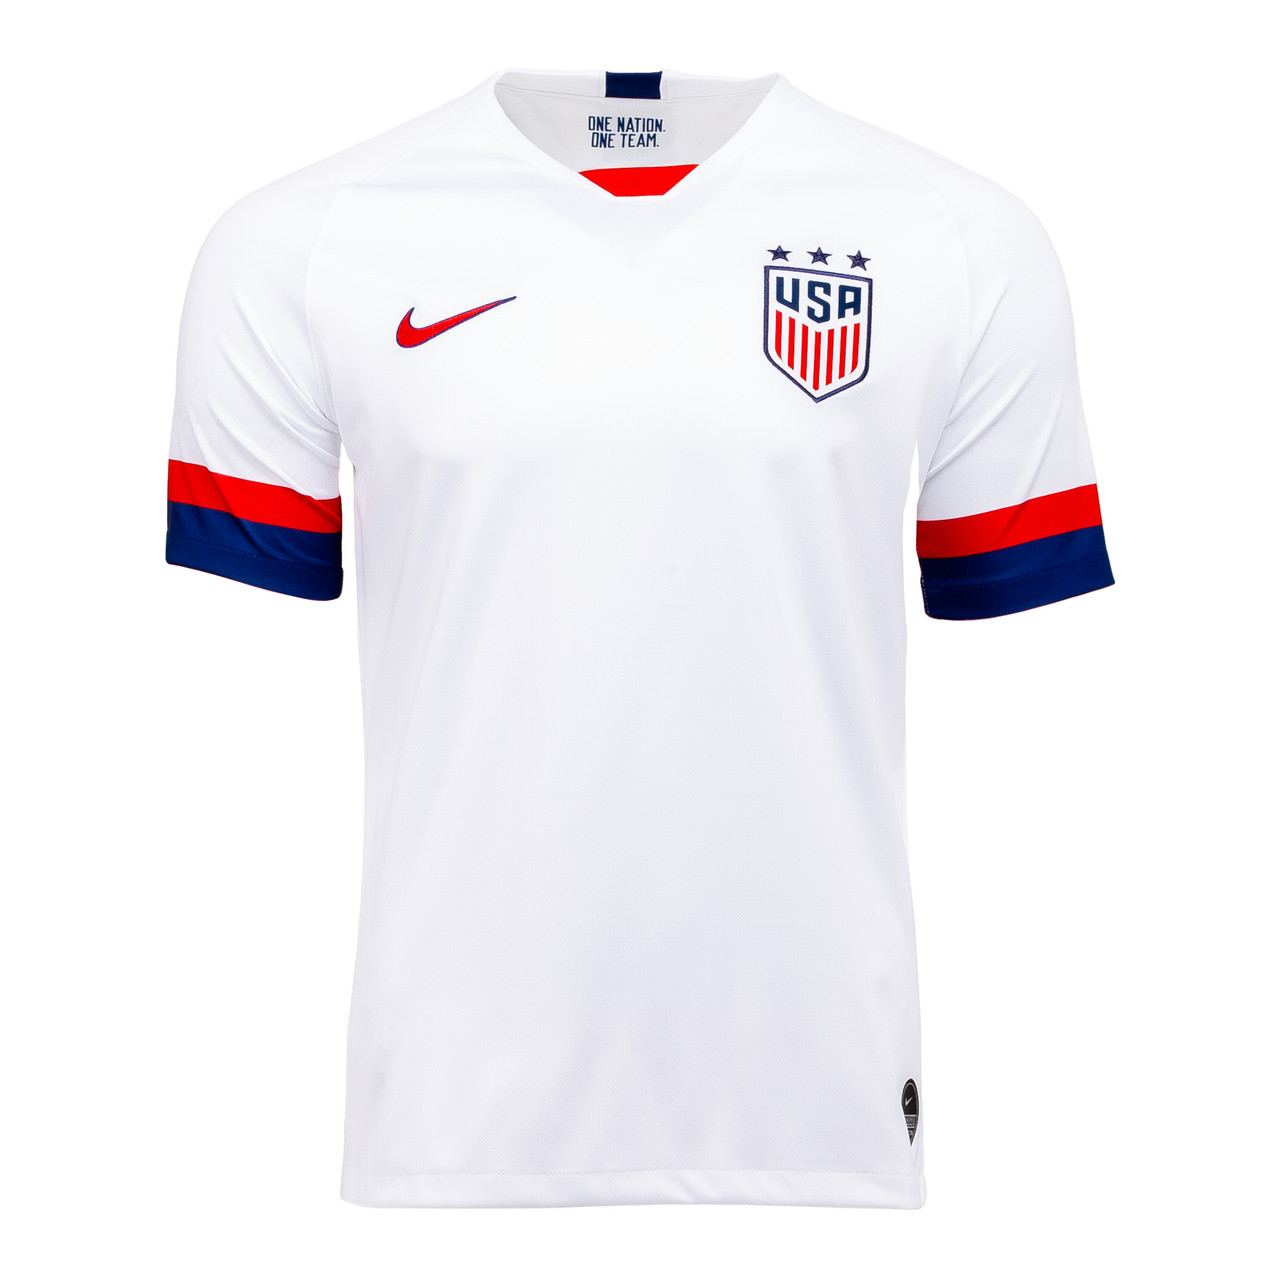 Nike USWNT Men's 2019 Home Stadium Jersey (White/Blue Void/University Red) - Adult Small